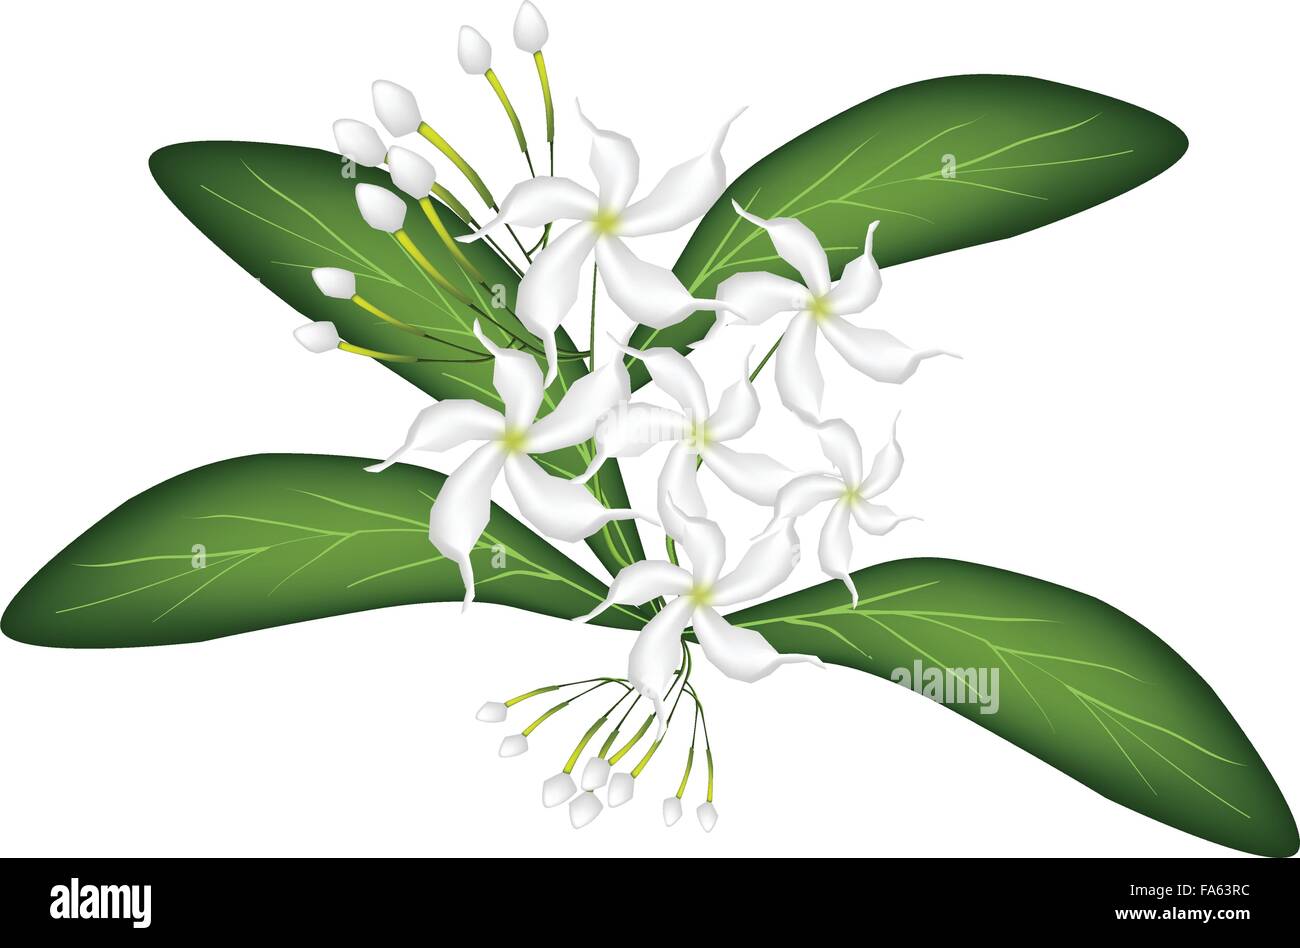 Beautiful Flower, An Illustration of Lovely White Common Gardenias or Cape Jasmine Flowers on Green Leaves Isolated on A White B Stock Vector